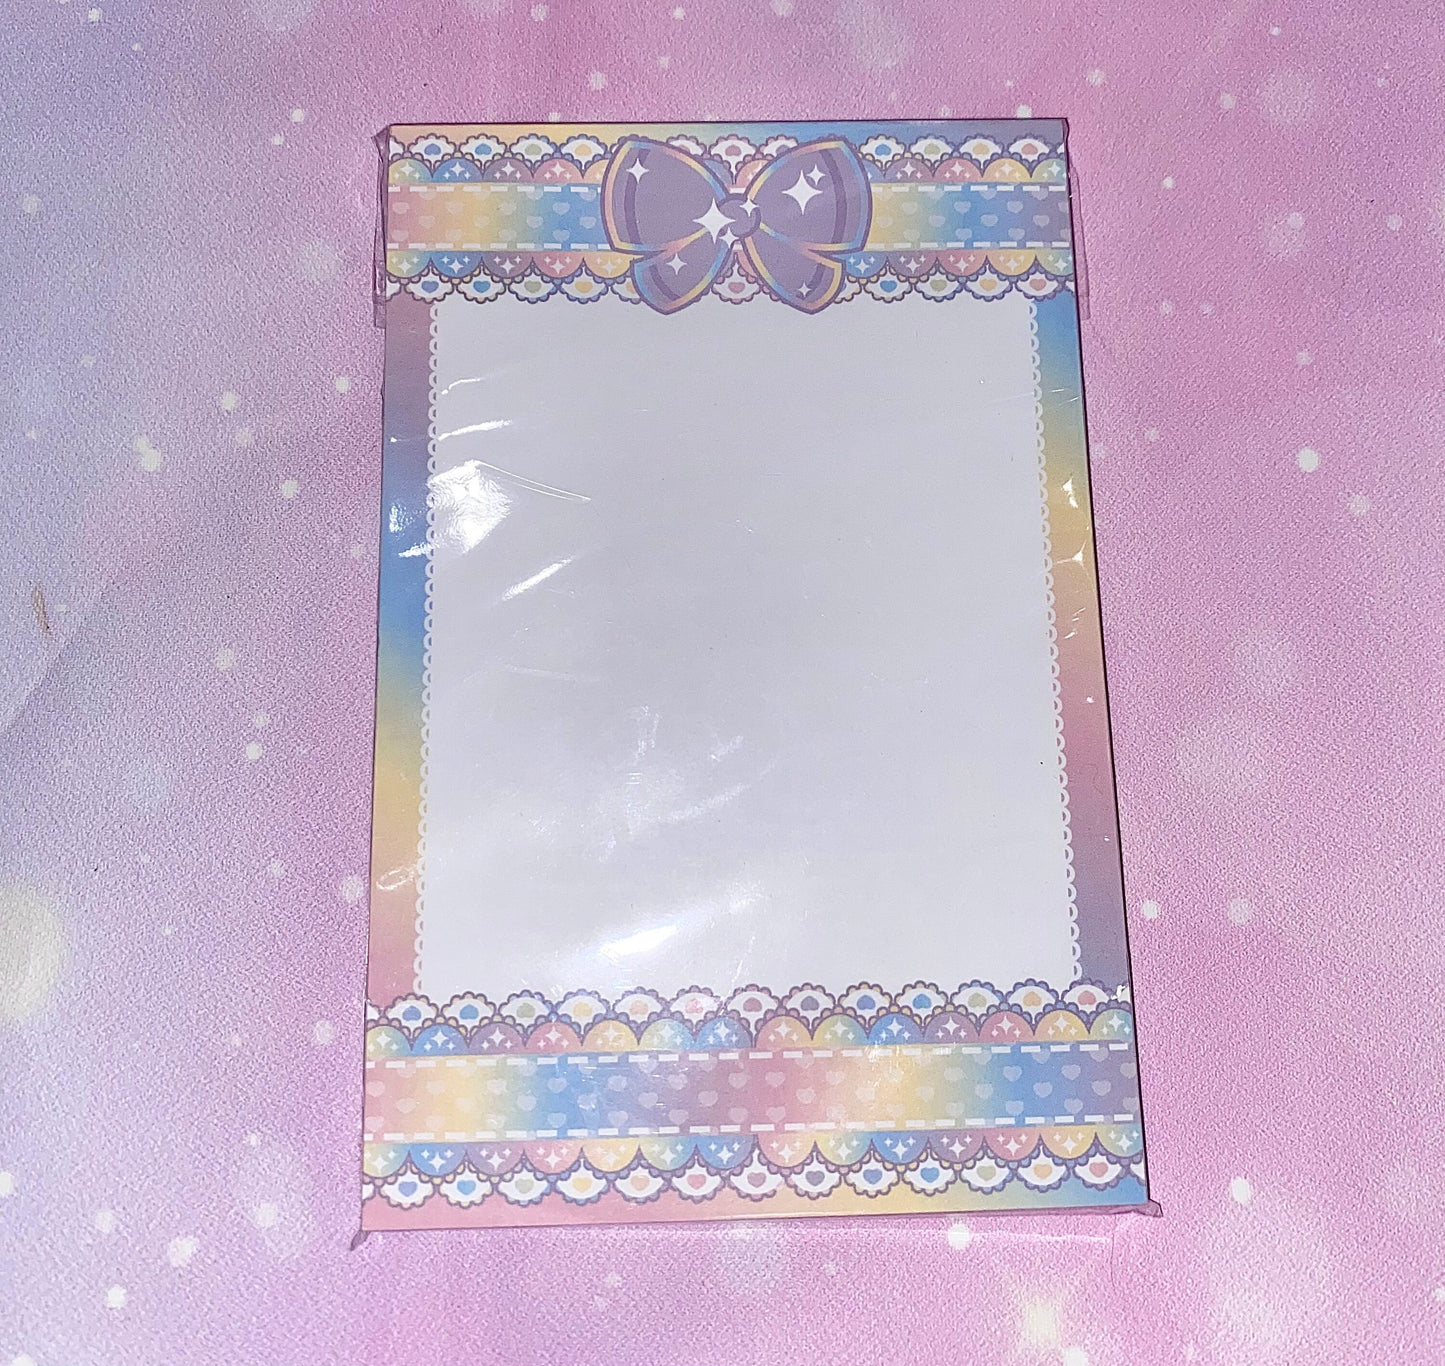 Rainbow Lace Notepad | funny notepads, girly notepads, cute notepads, lace, lace notepads